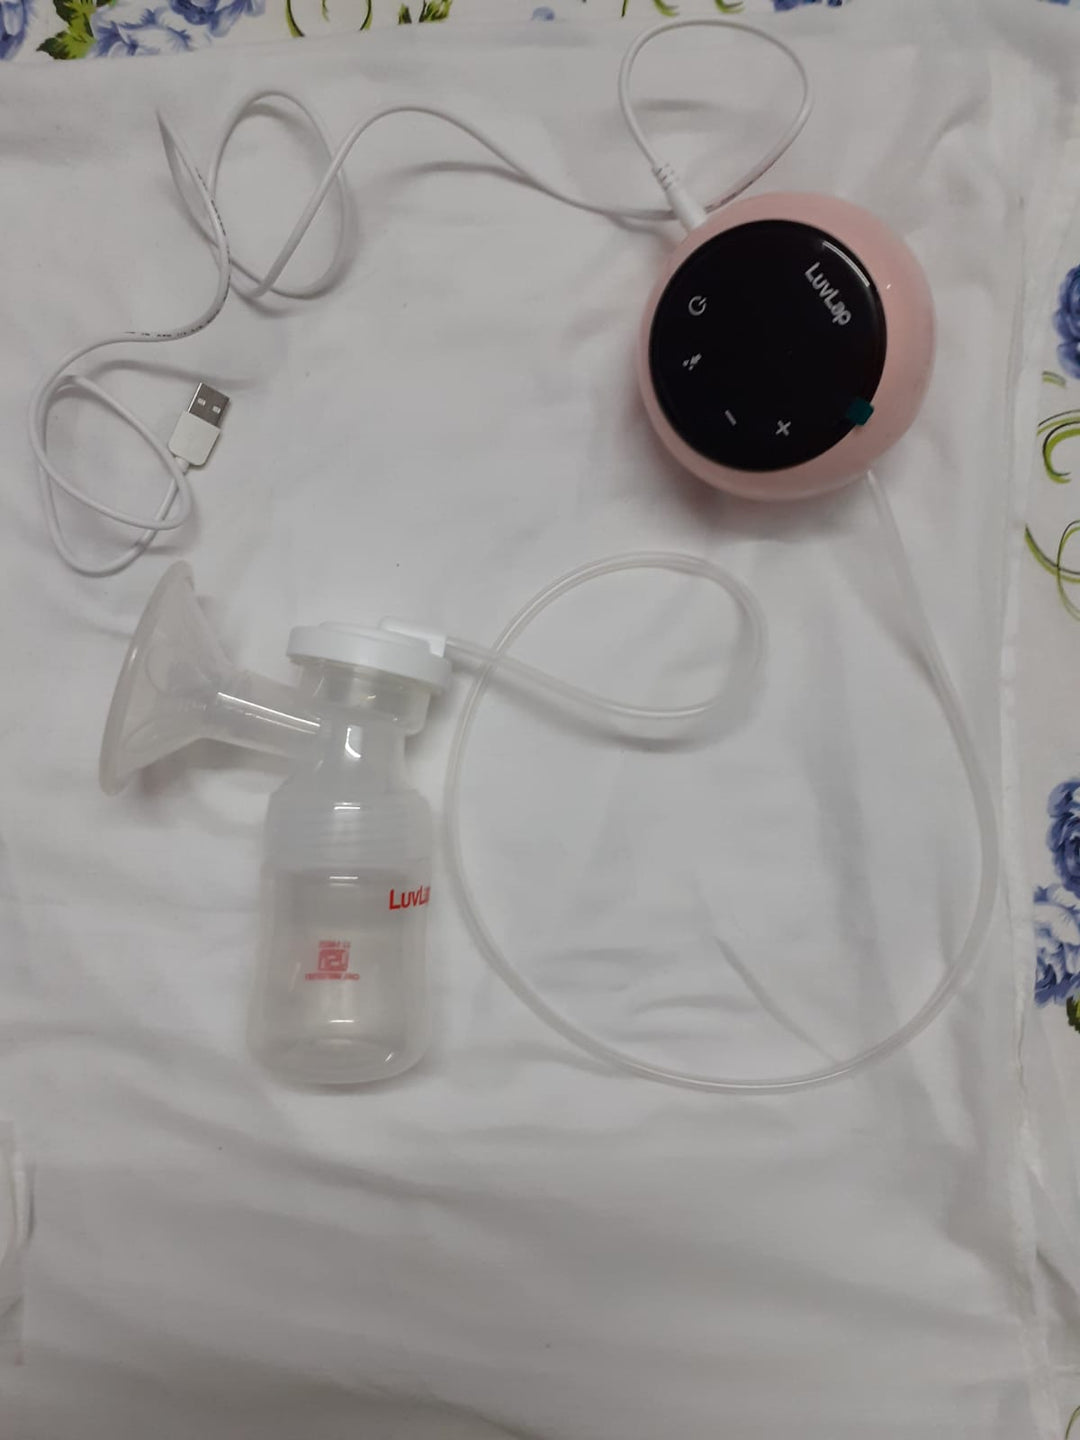 Luvlap Double Electric Breast Pump